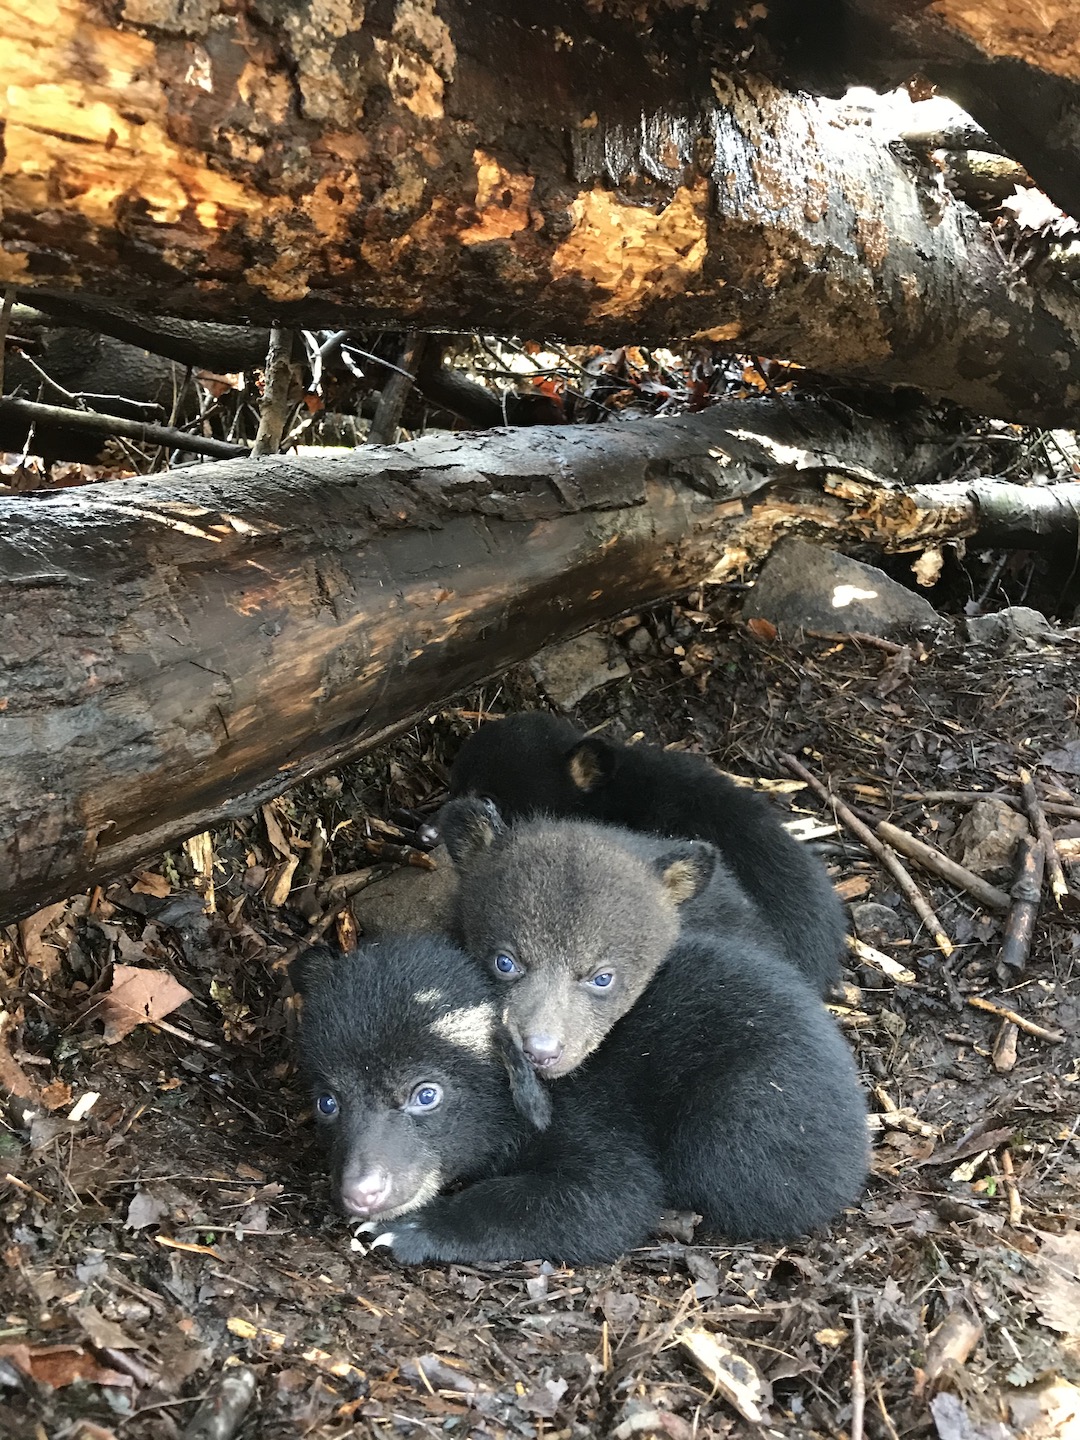 Two black bear cubs crouching under a branch amongst some leaves